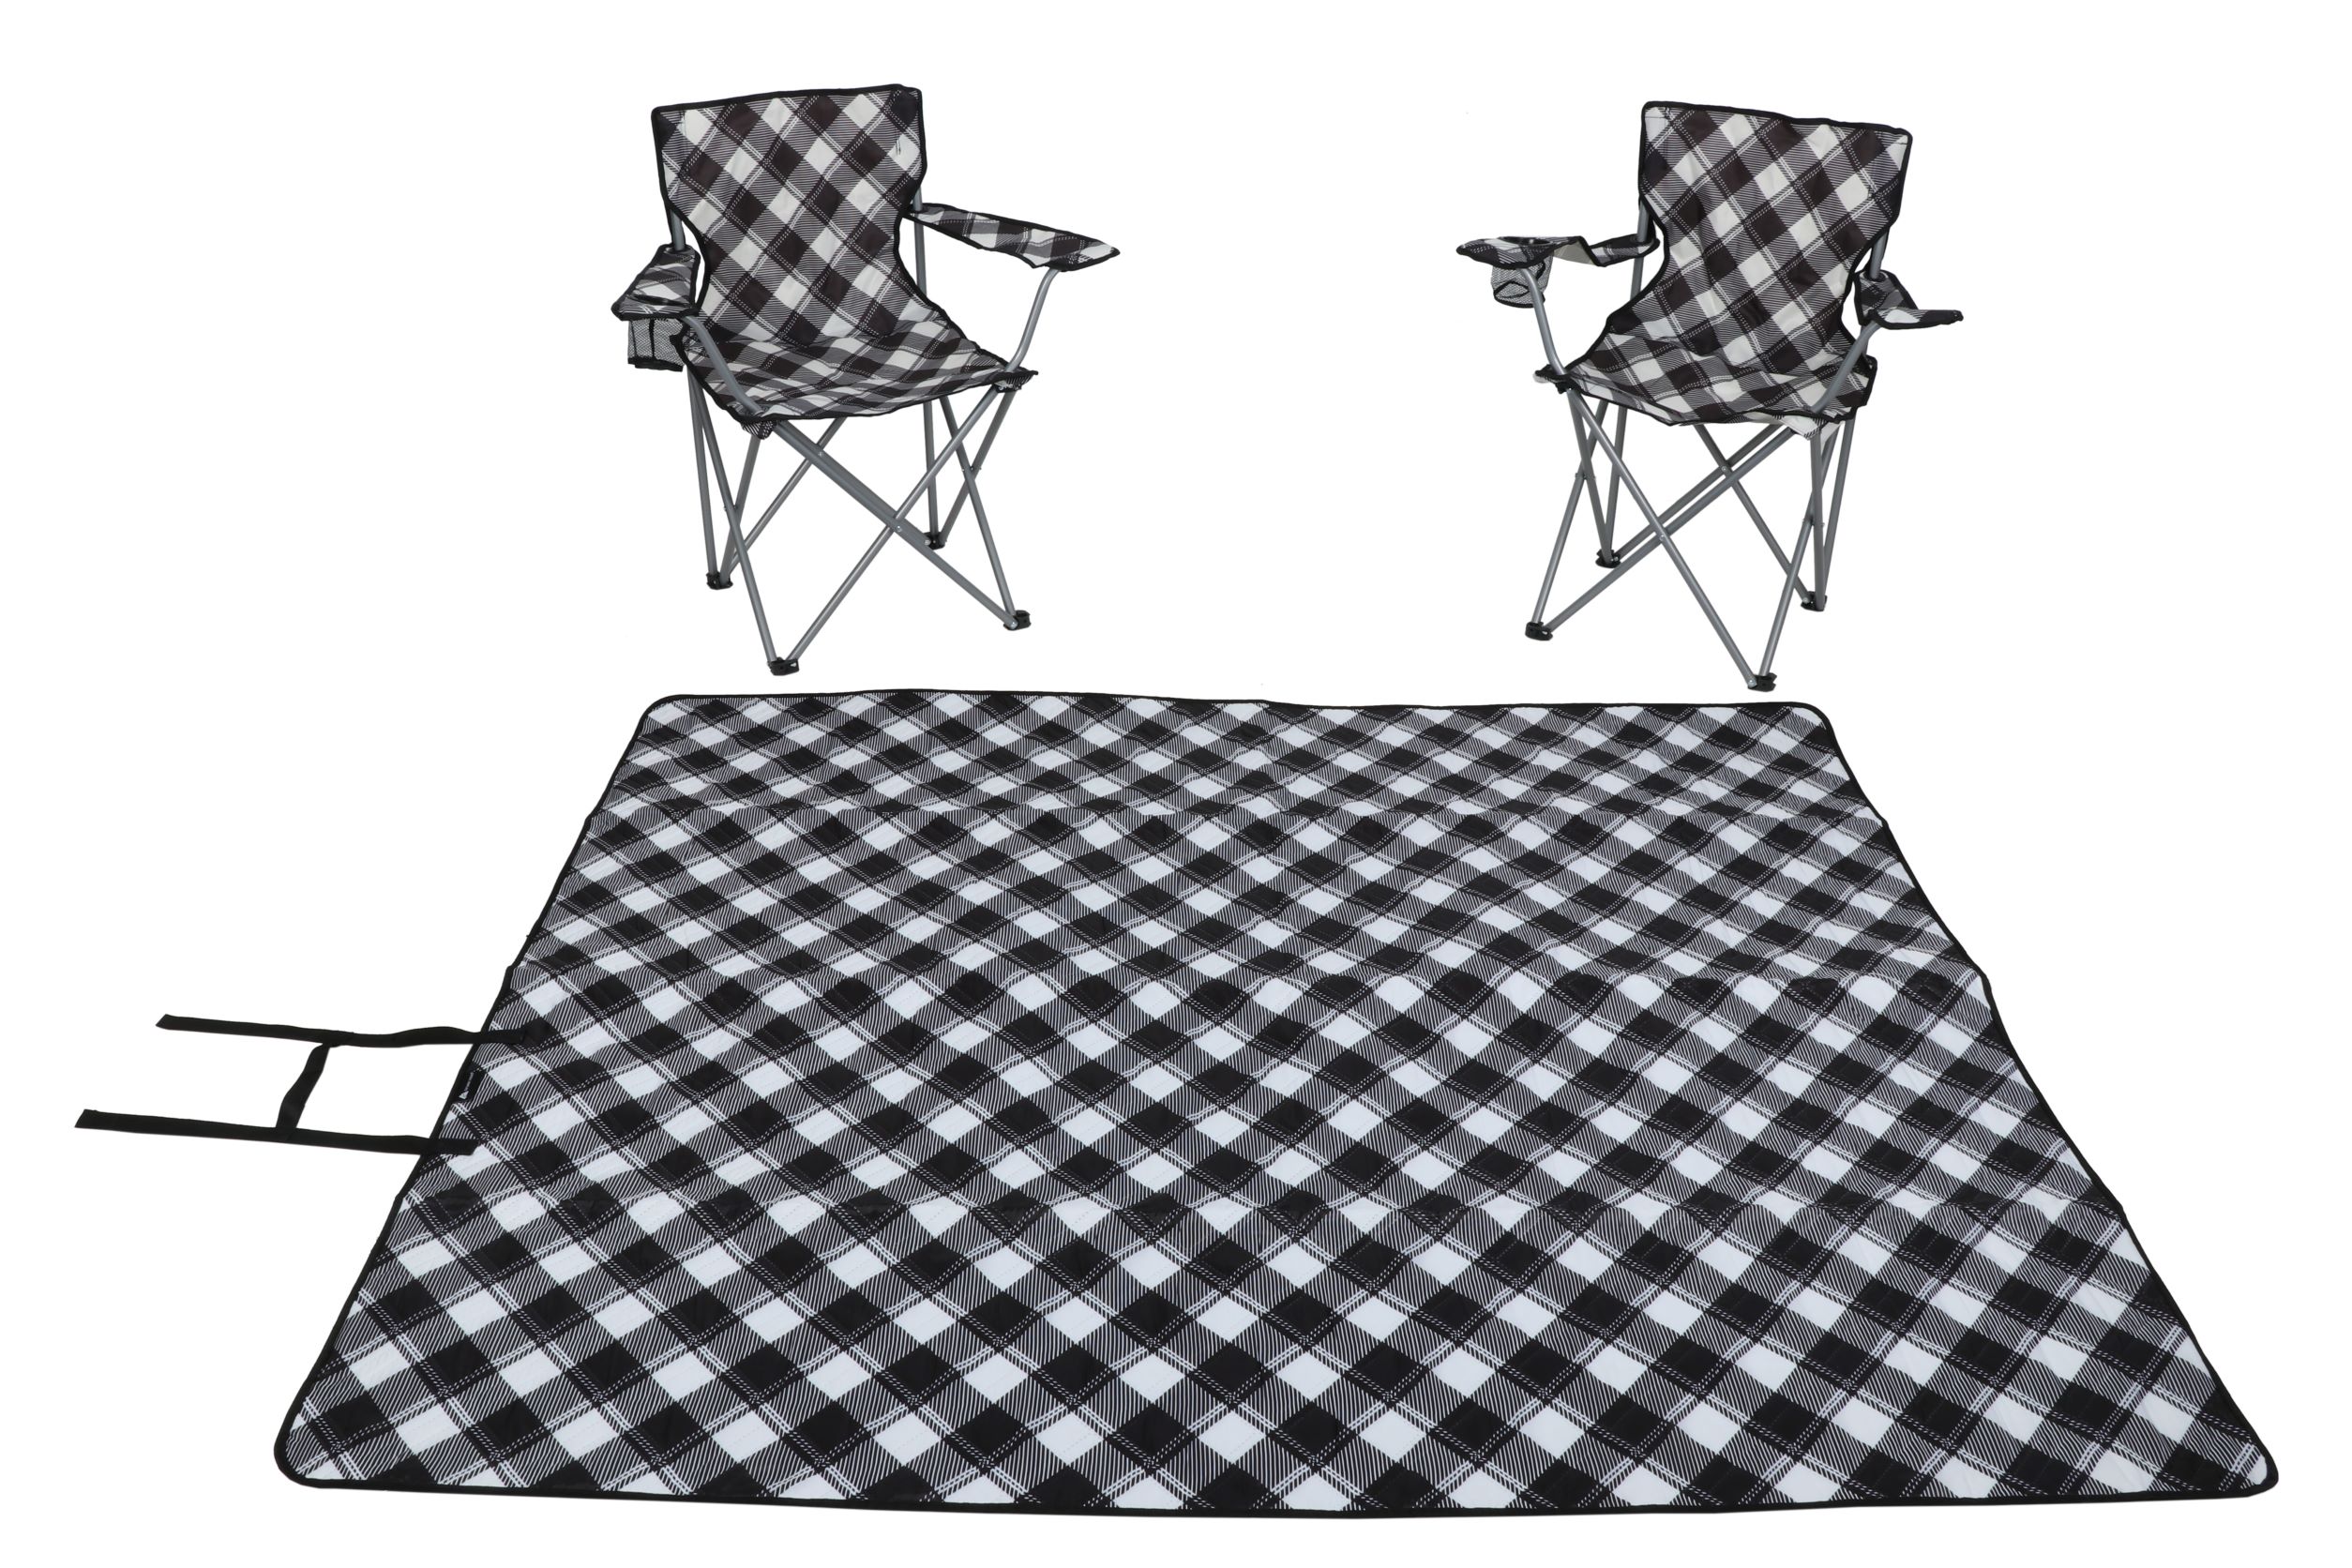 Ozark Trail Blanket and Two Chair Combo, Adult, Black White - image 1 of 14